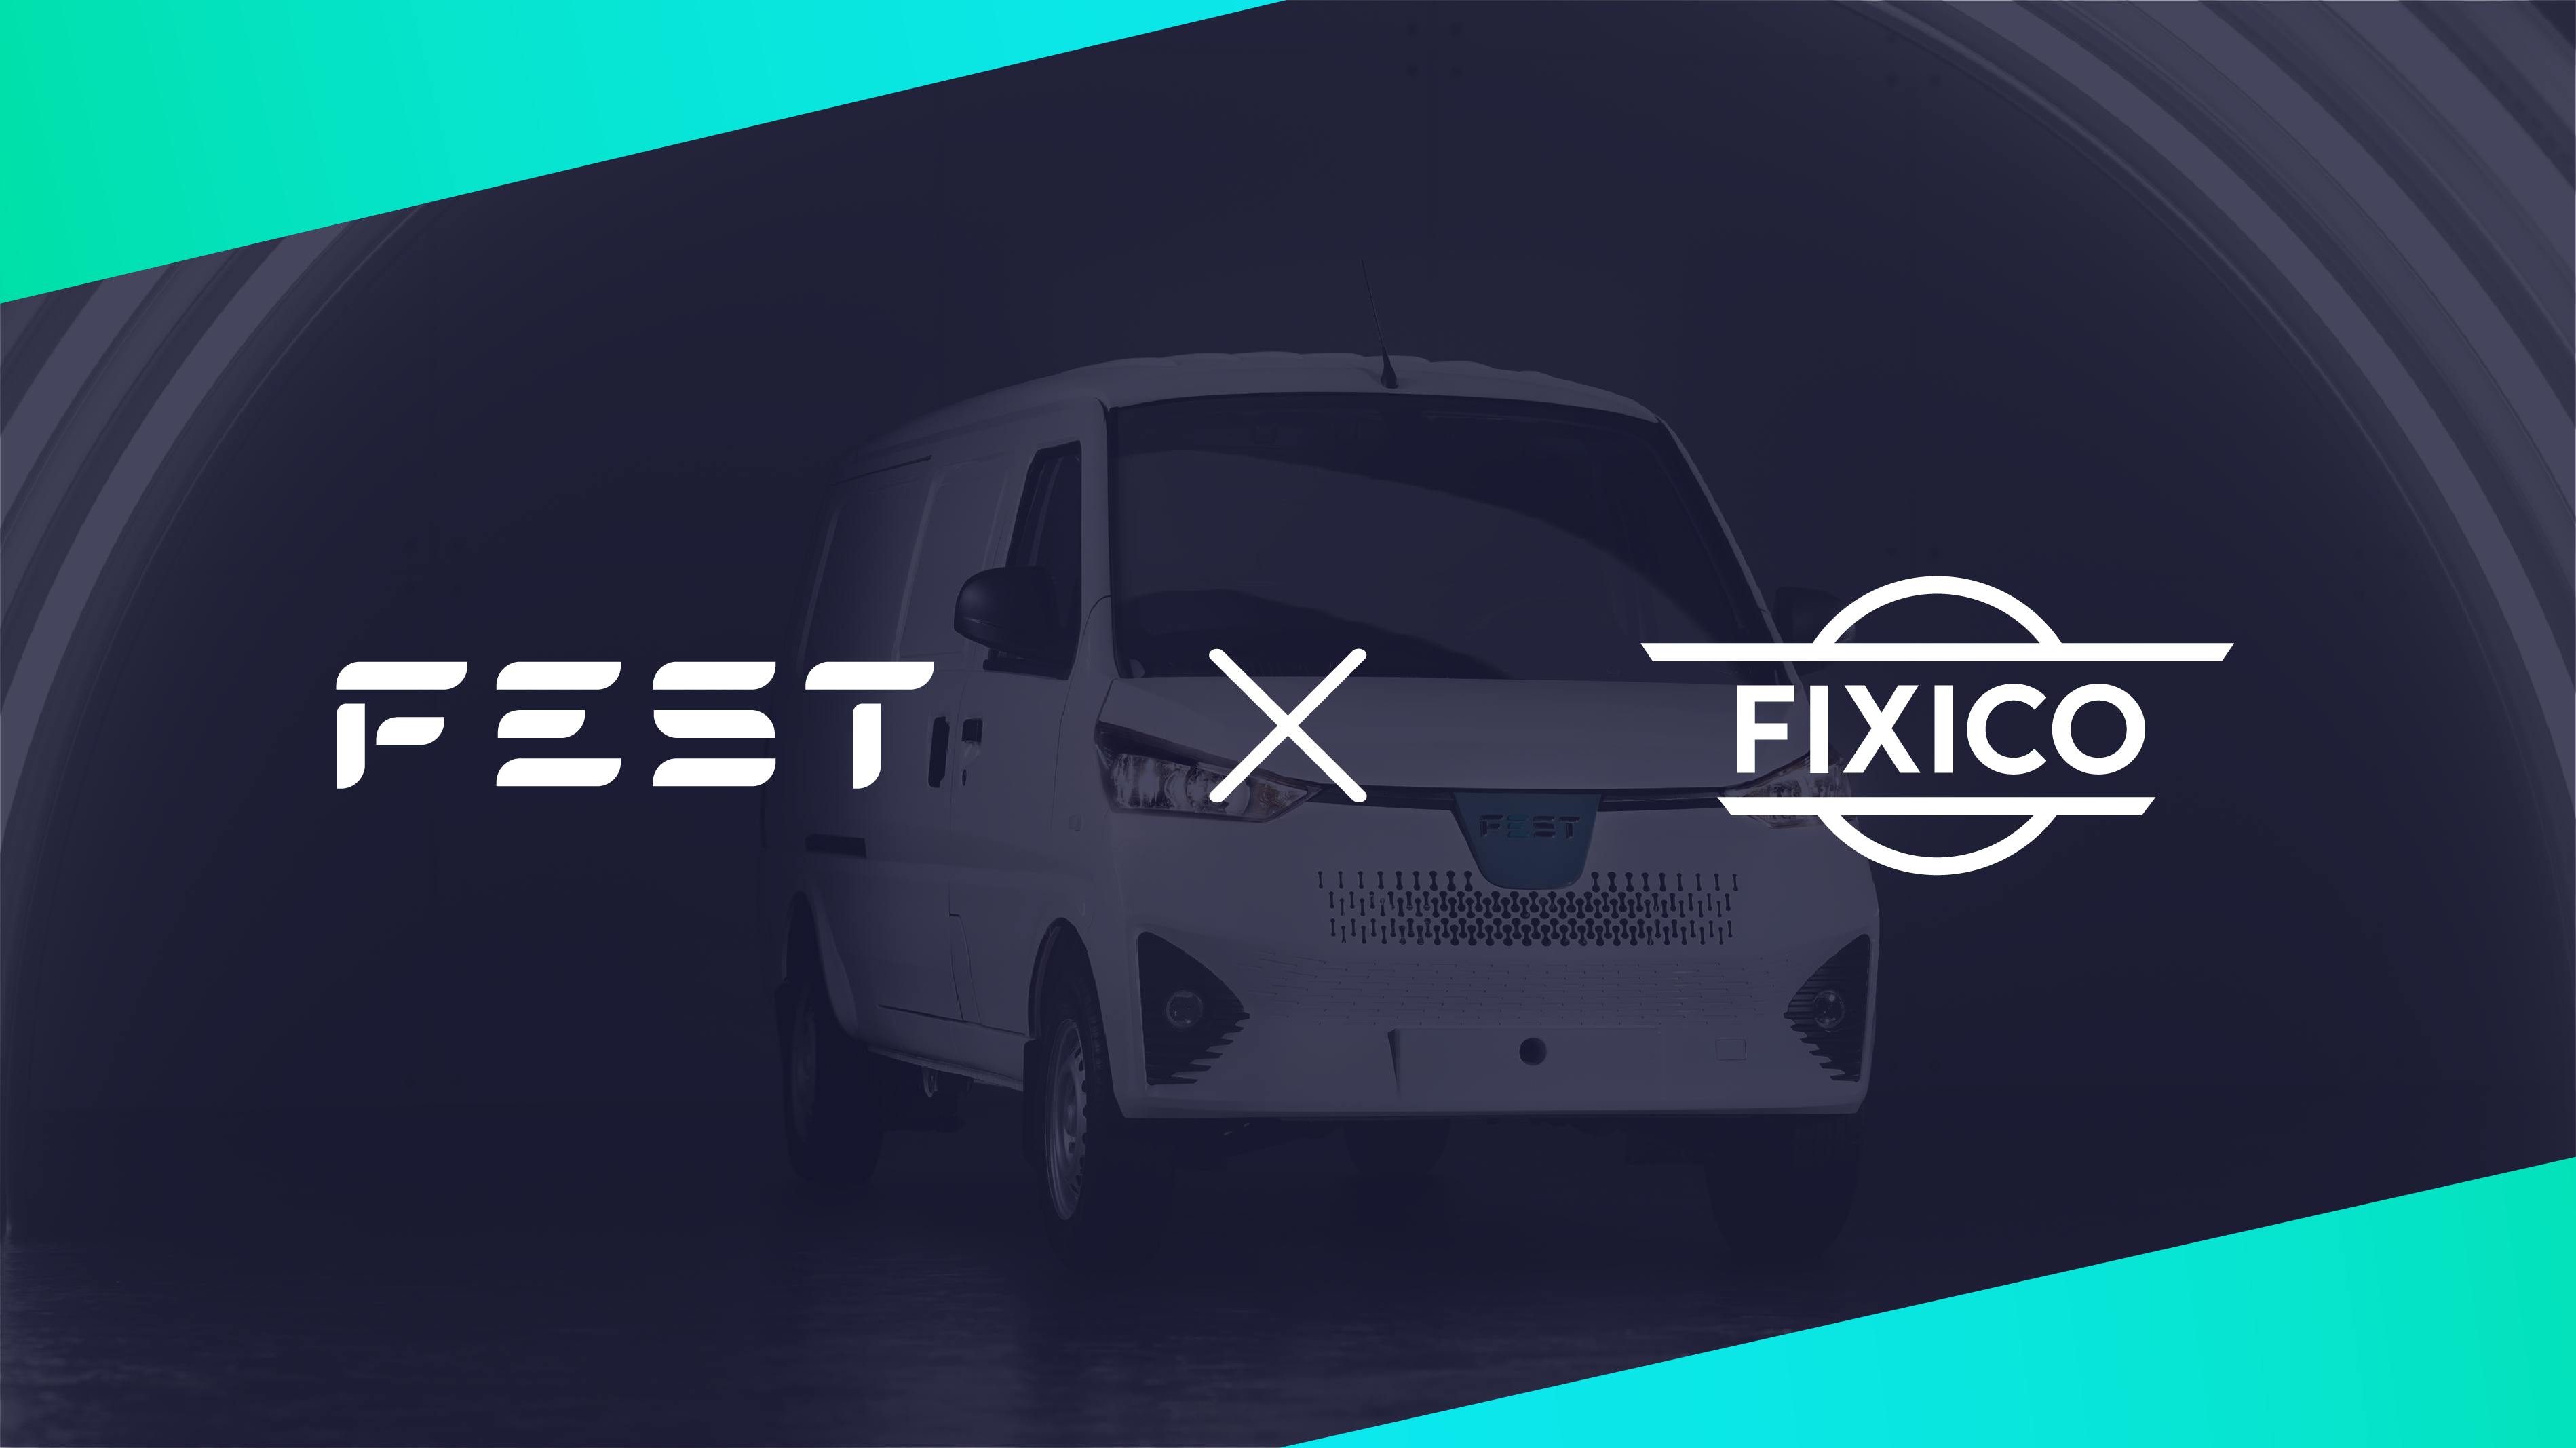 FEST selects Fixico for EV aftersales service management